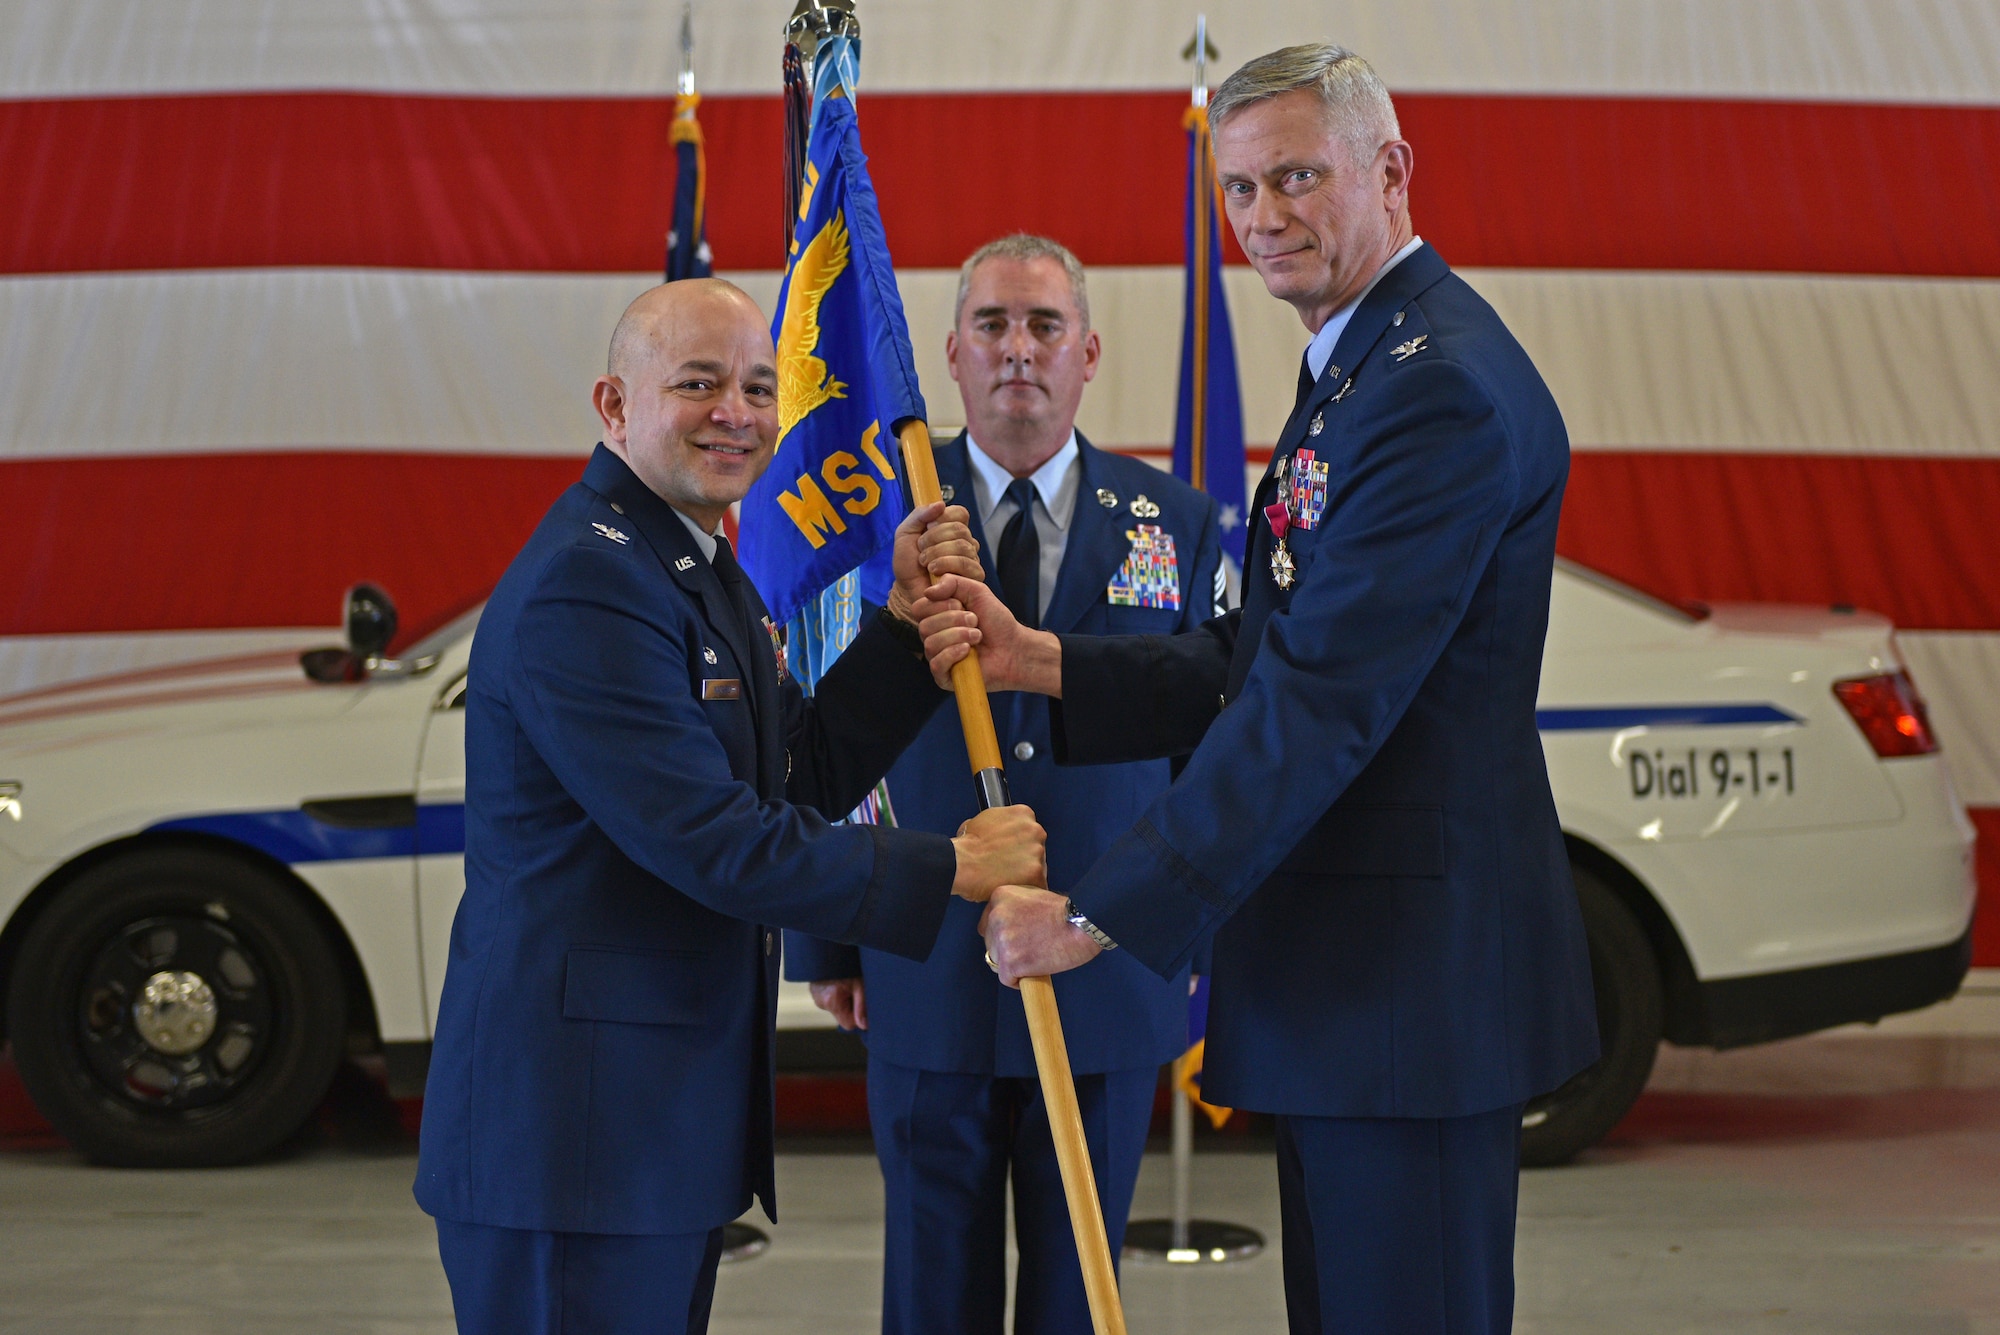 U.S. Air Force Col. Andres Nazario, 17th Training Wing commander, takes the guidon from Col. Tony England, outgoing 17th Mission Support Group commander, during the change of command ceremony on Goodfellow Air Force Base, Texas, June 23, 2021. England is taking a position at Pacific Air Forces Headquarters at Hickam AFB, Hawaii. (U.S. Air Force photo by Senior Airman Ashley Thrash)